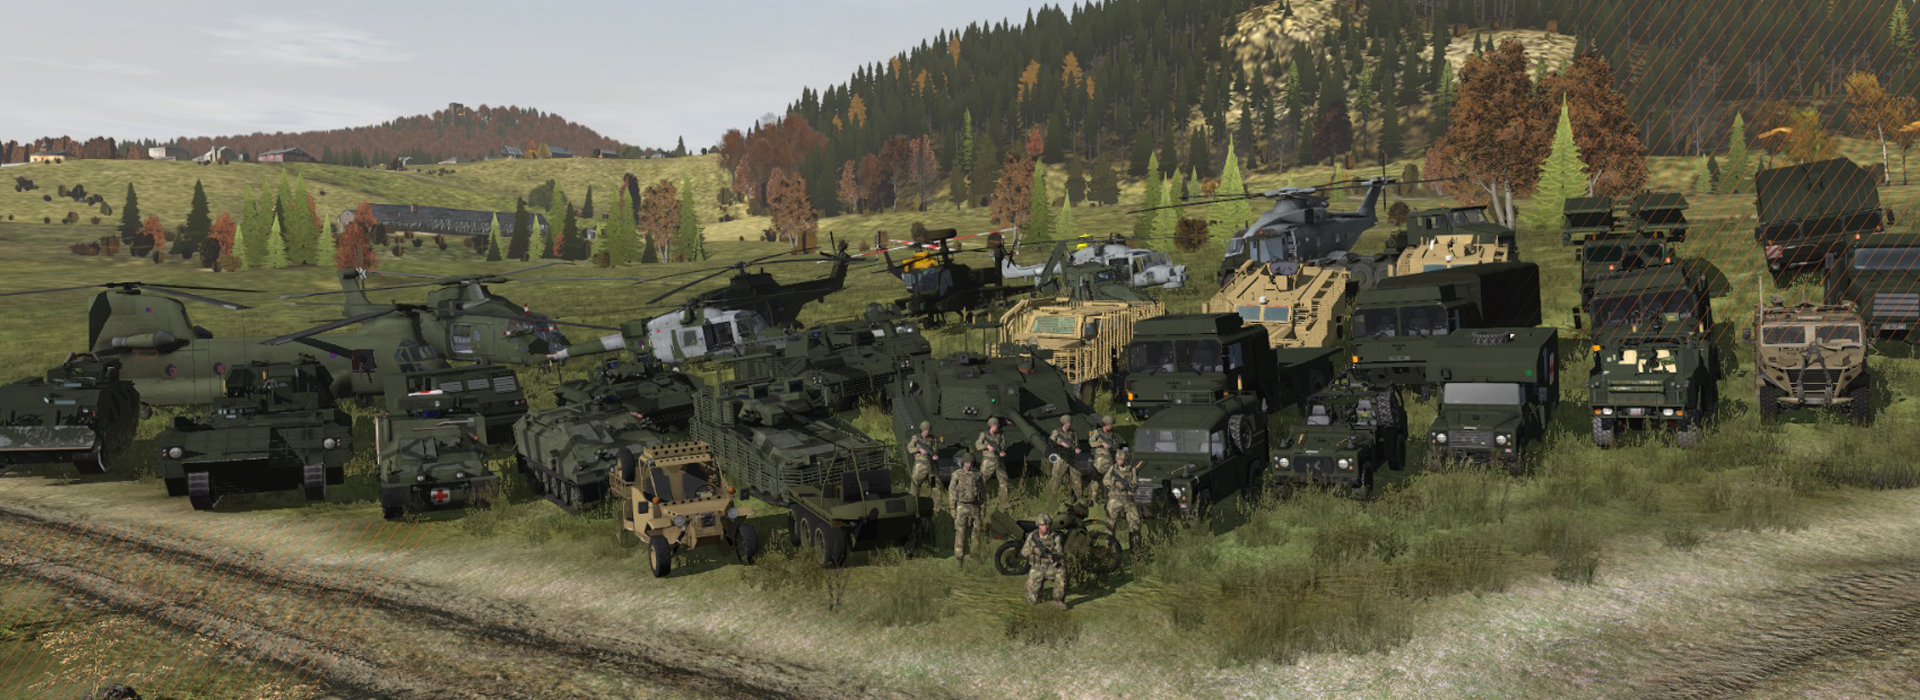 vbs3_selected_as_the_defence_virtual_simulation_solution_for_uk_mod